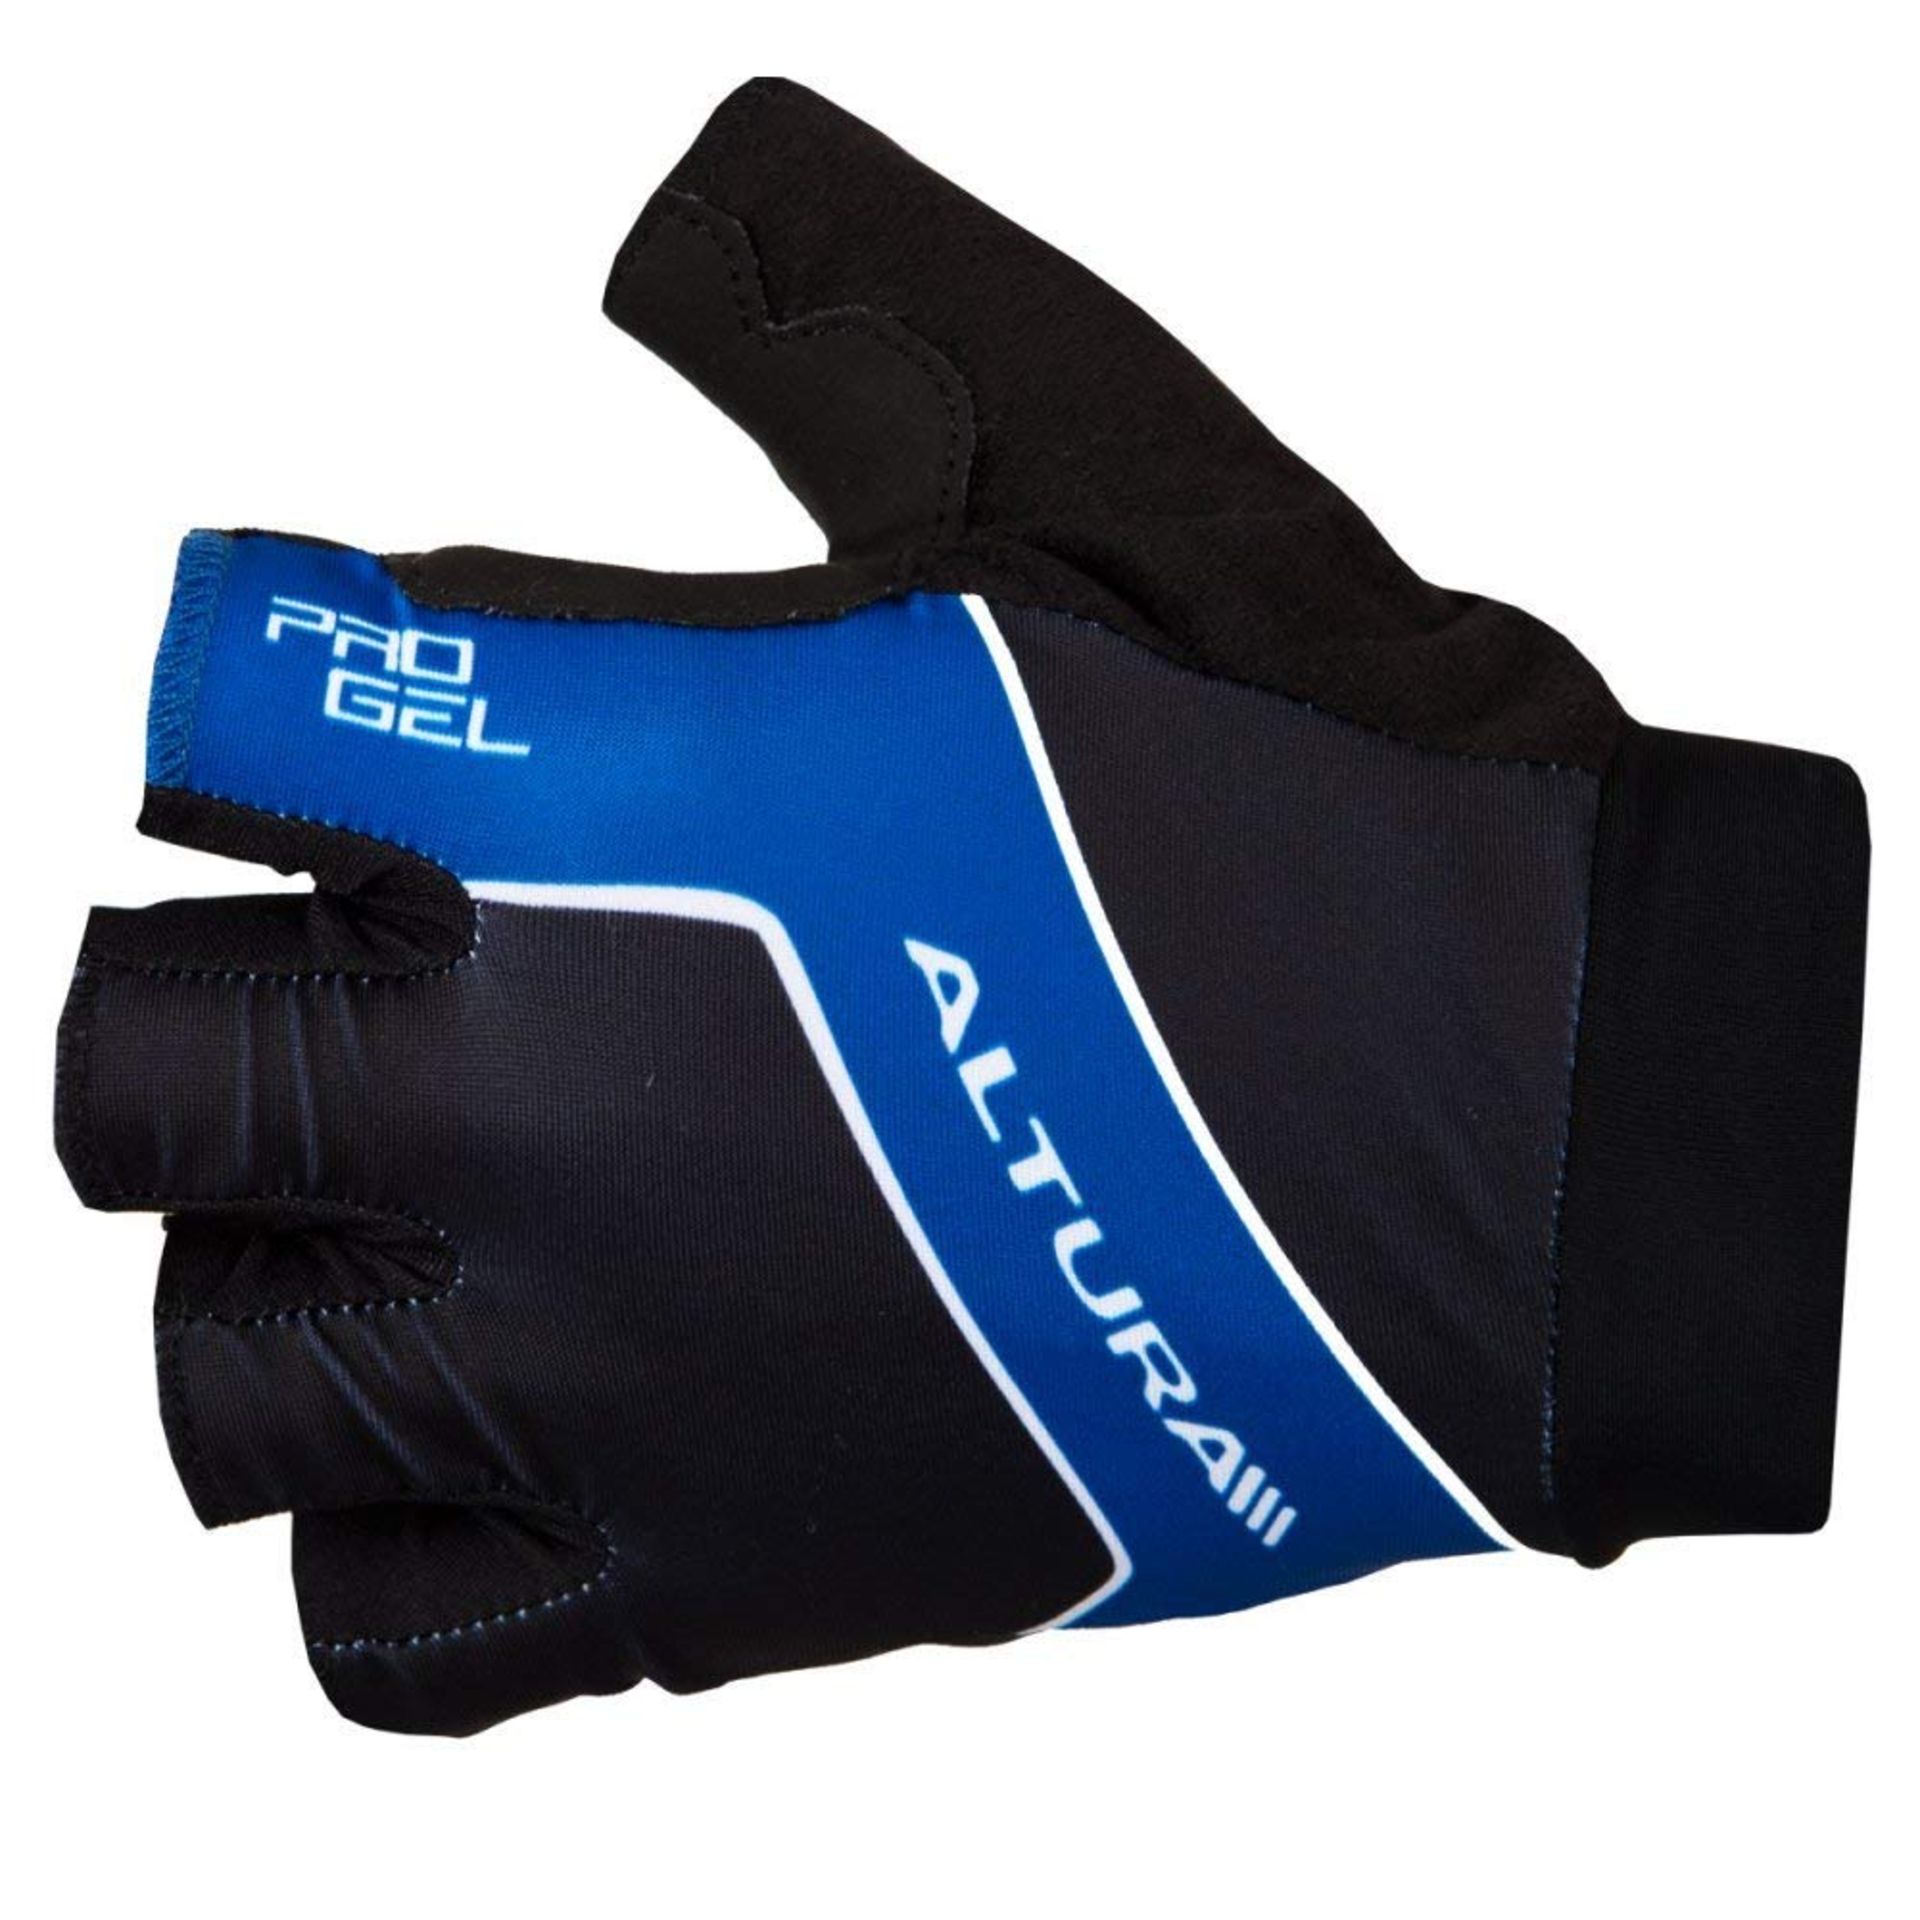 6 x Pairs Women's Cycling Gloves | Total RRP £114.03 | See Description for Details - Image 2 of 4